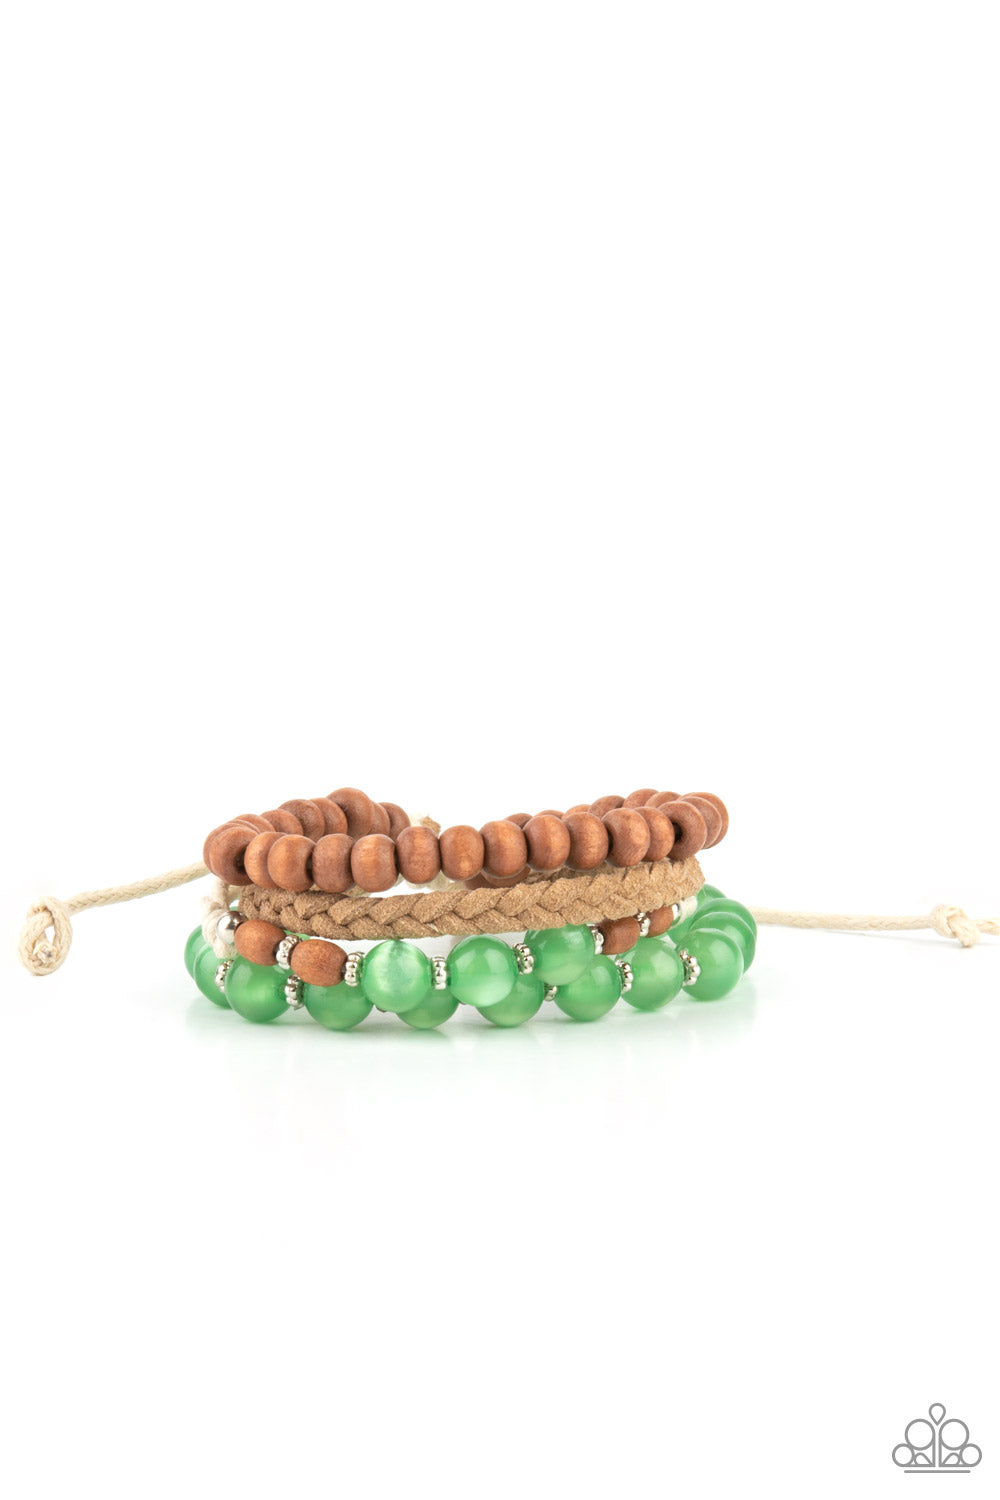 Strands of glassy green cat's eye beads stand out in an earthy collection of wooden beads and braided twine, giving a polished flair to the natural homespun look as it stacks up the wrist. Features an adjustable sliding knot closure.